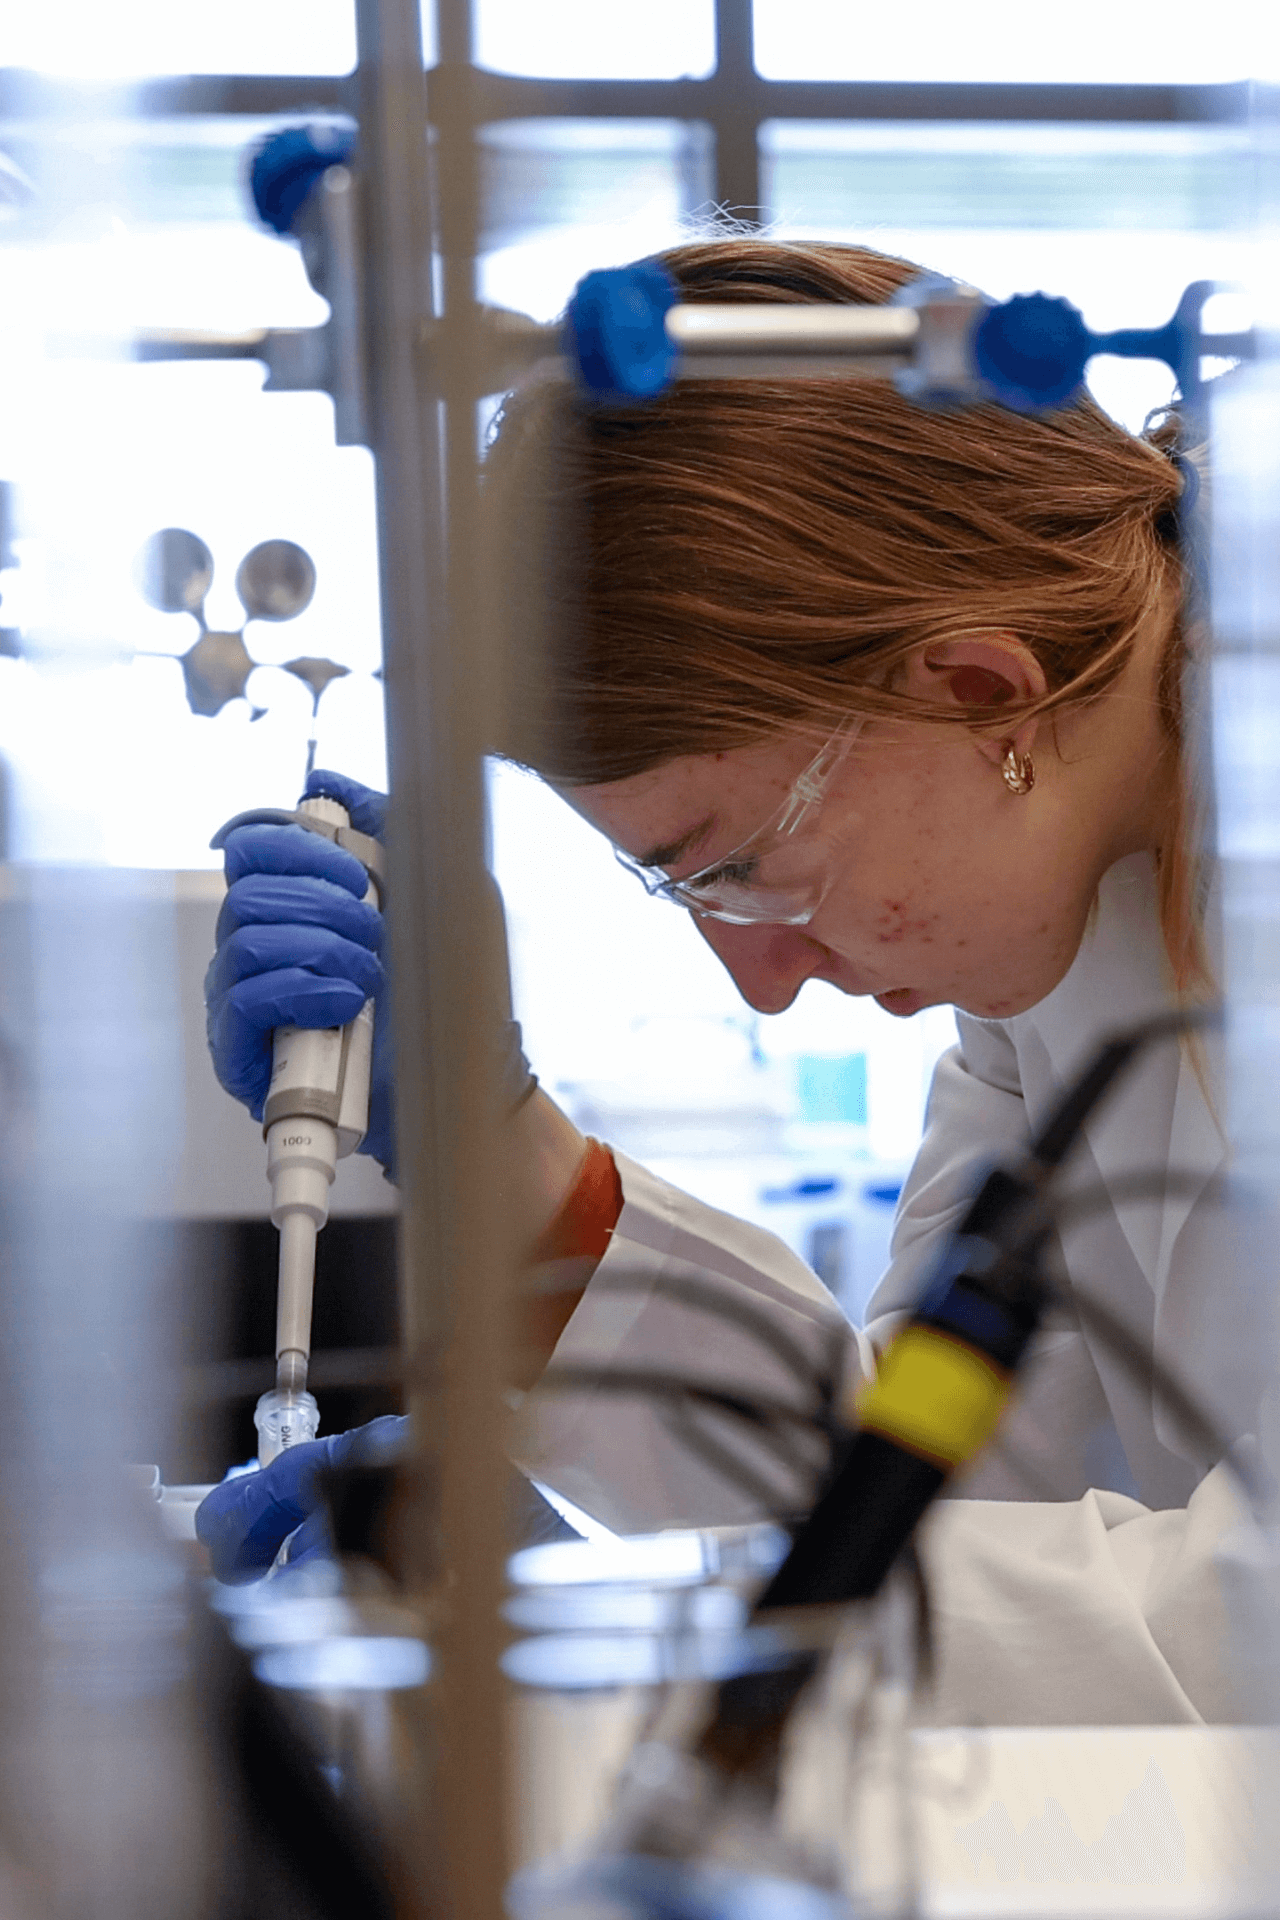 A student works with a pipette